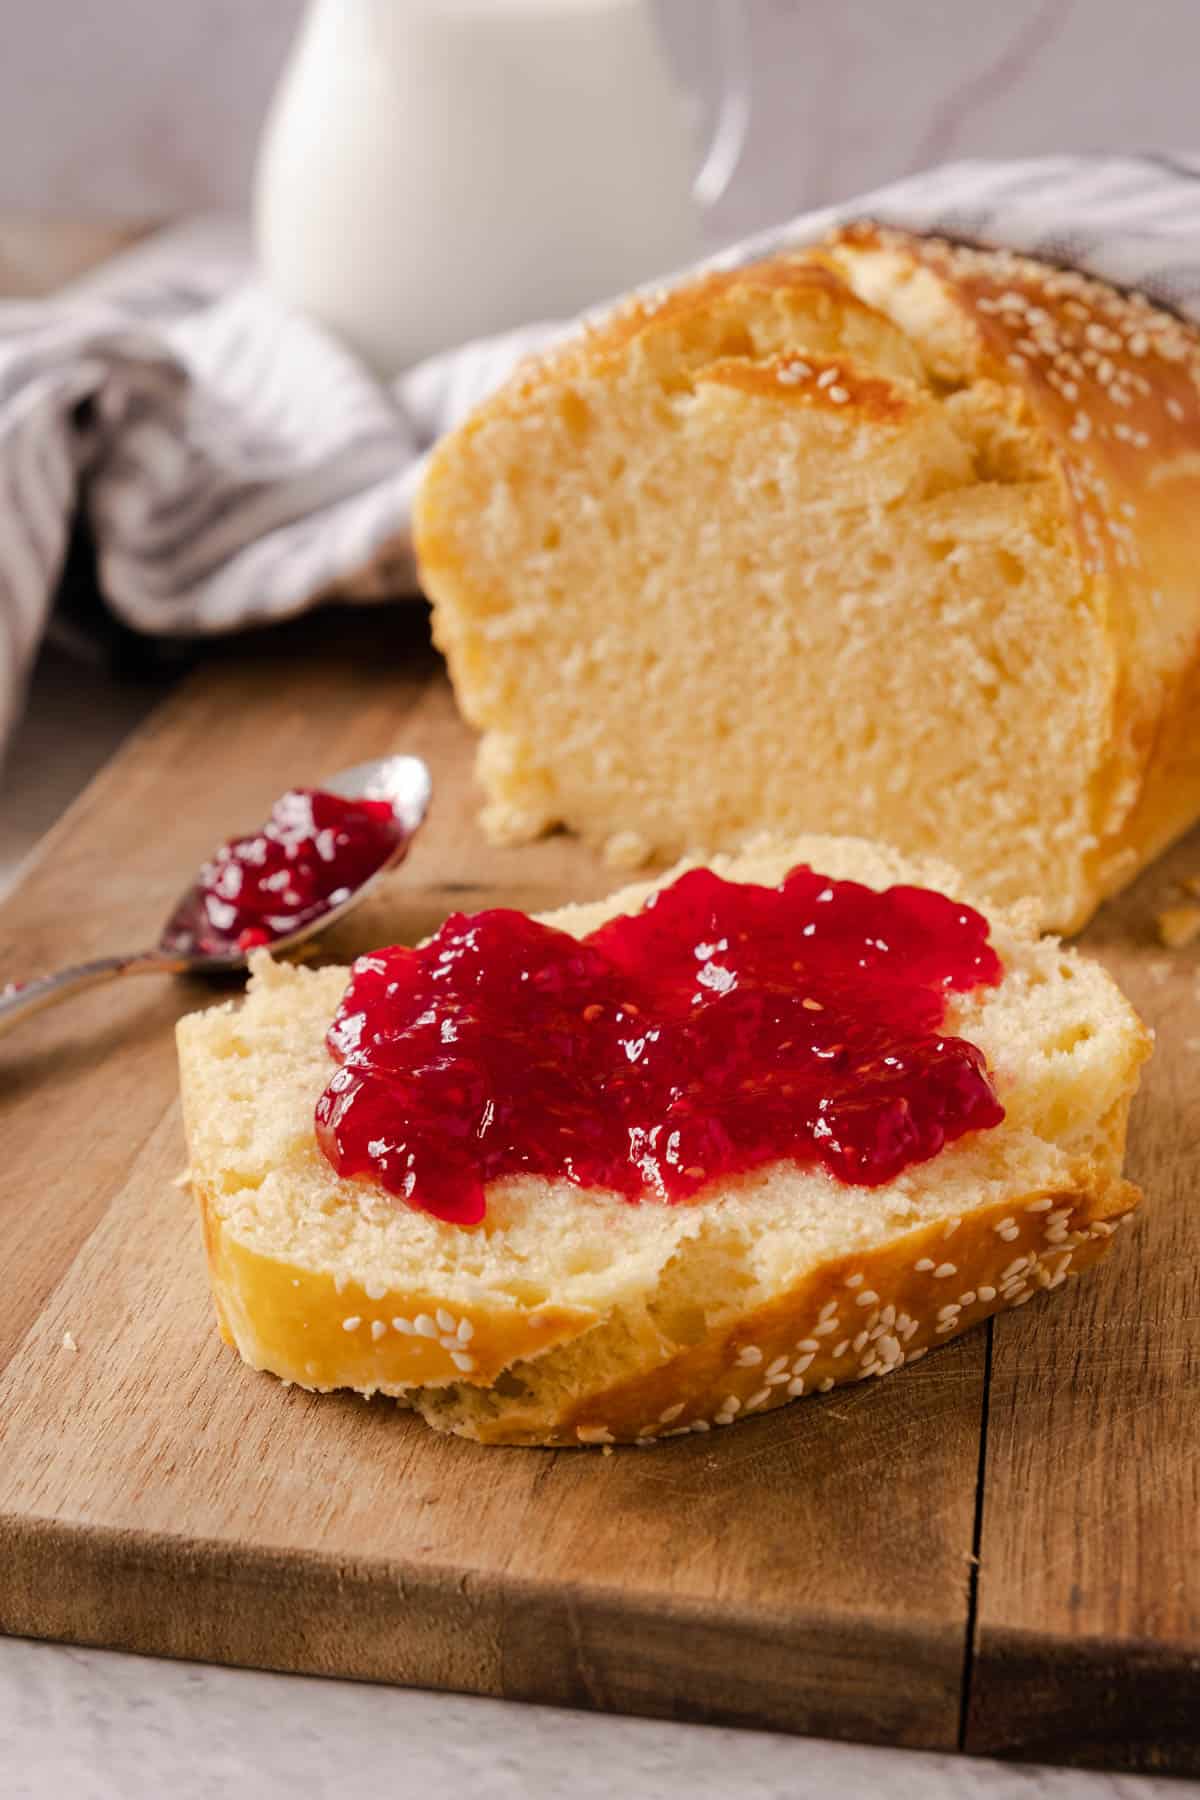 Jam spread over a slice of freshly baked brioche bread on a cutting board in front of the remaining loaf. 